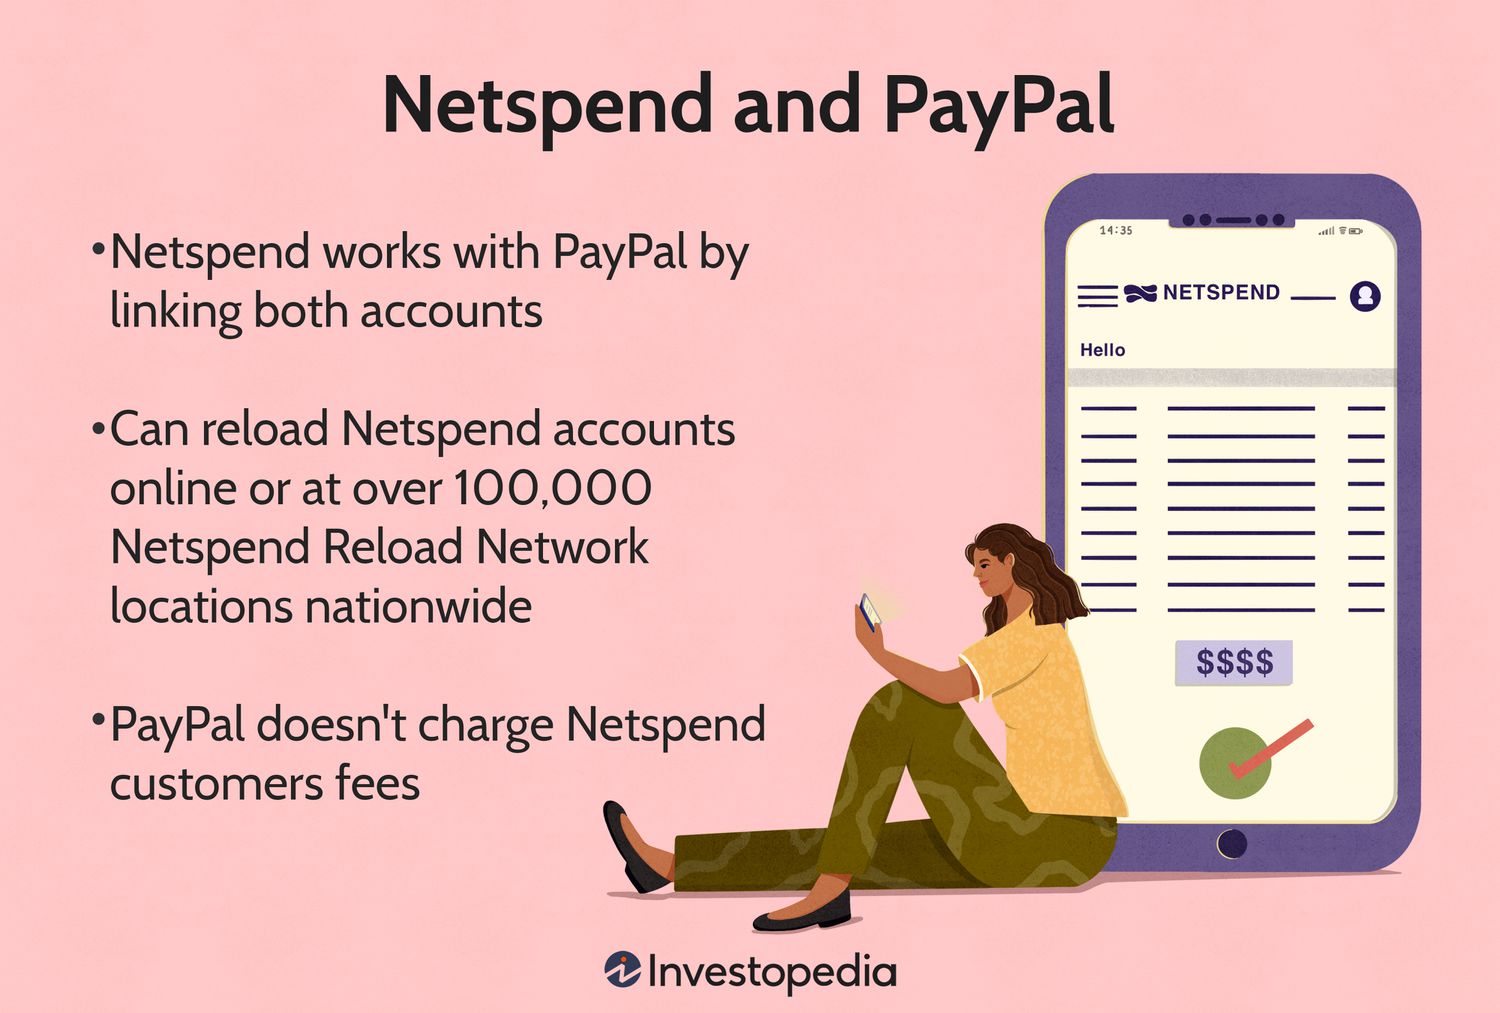 Can't Link Netspend Card To Paypal Account - PayPal Community